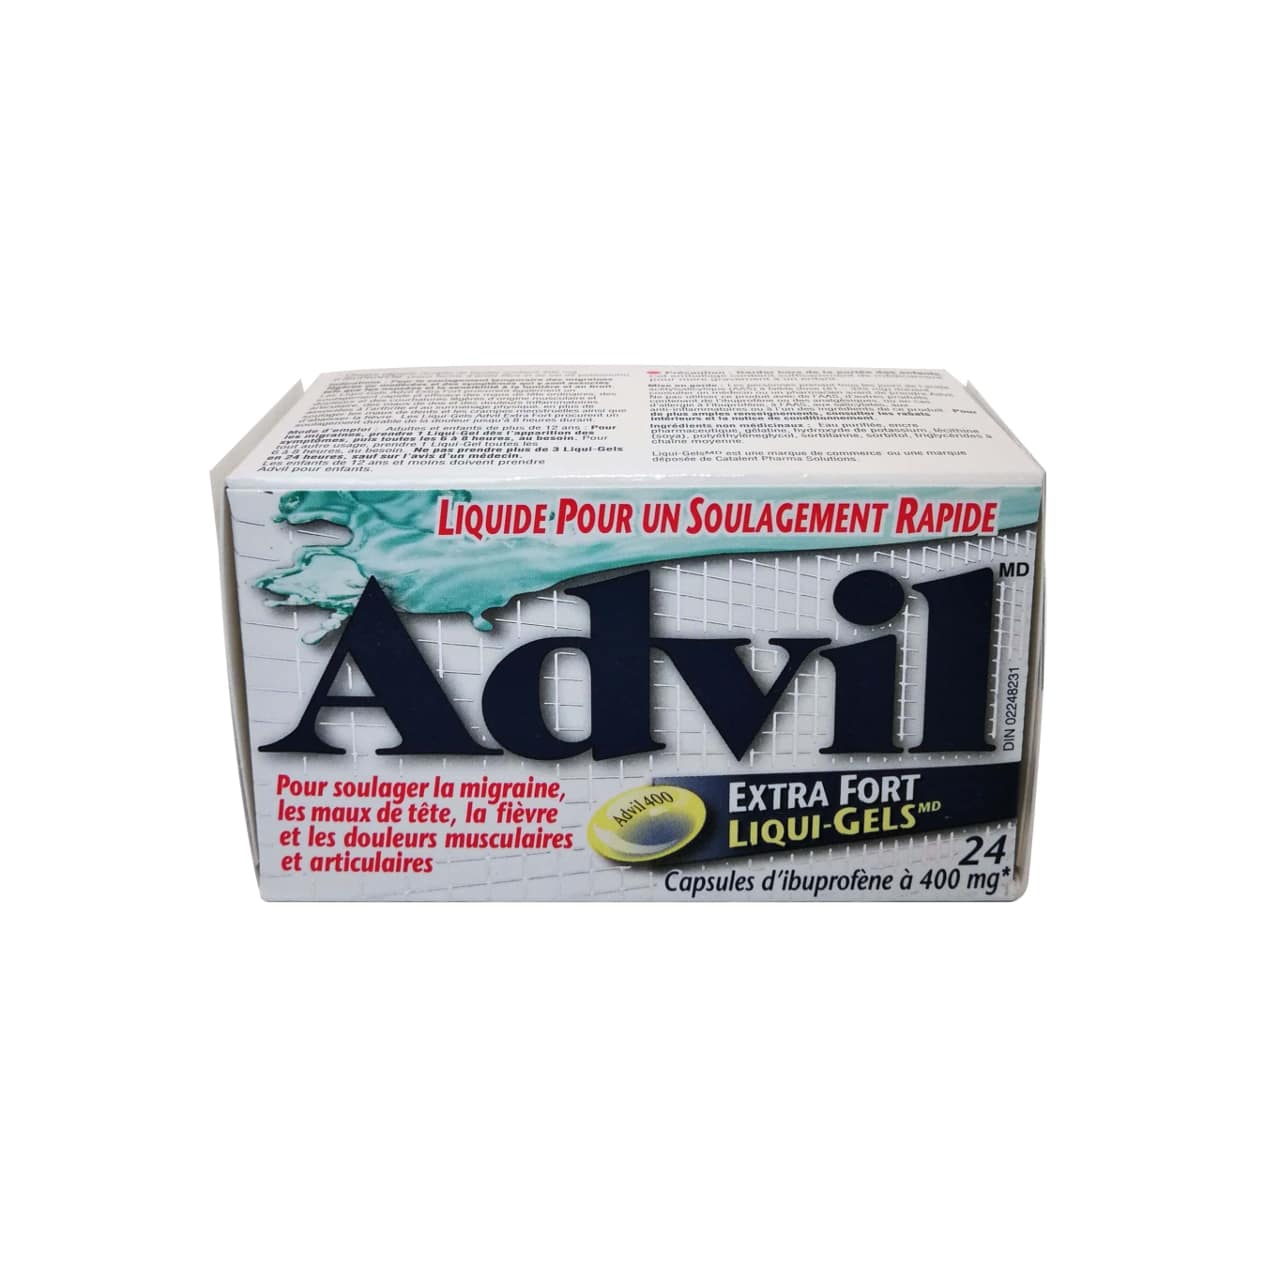 Advil Extra Strength Ibuprofen 400mg gel caps 24 pack French label